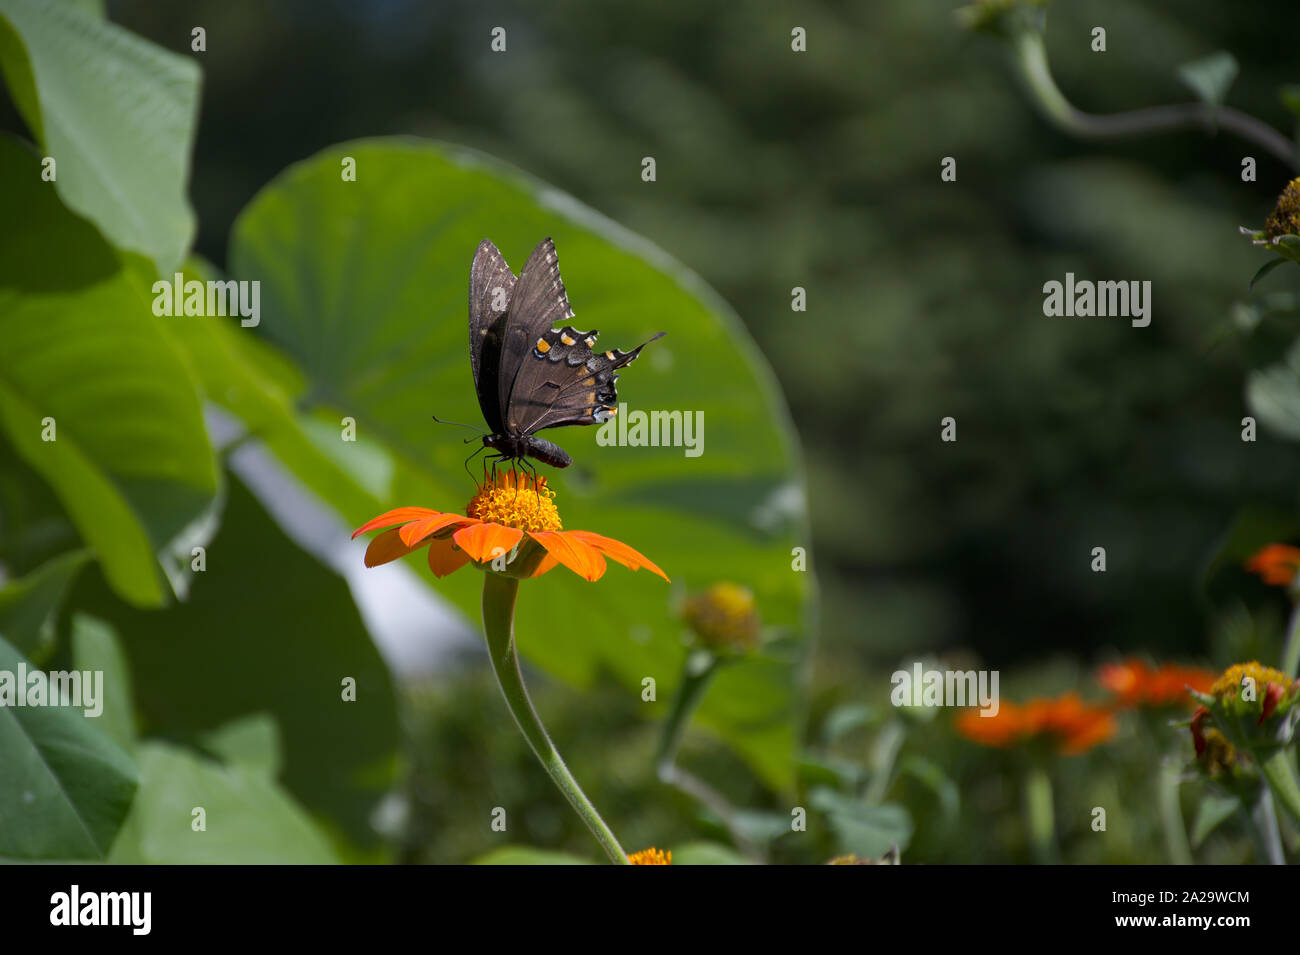 Morph Swallowtail perched on Mexican Sunflower profile view Stock Photo